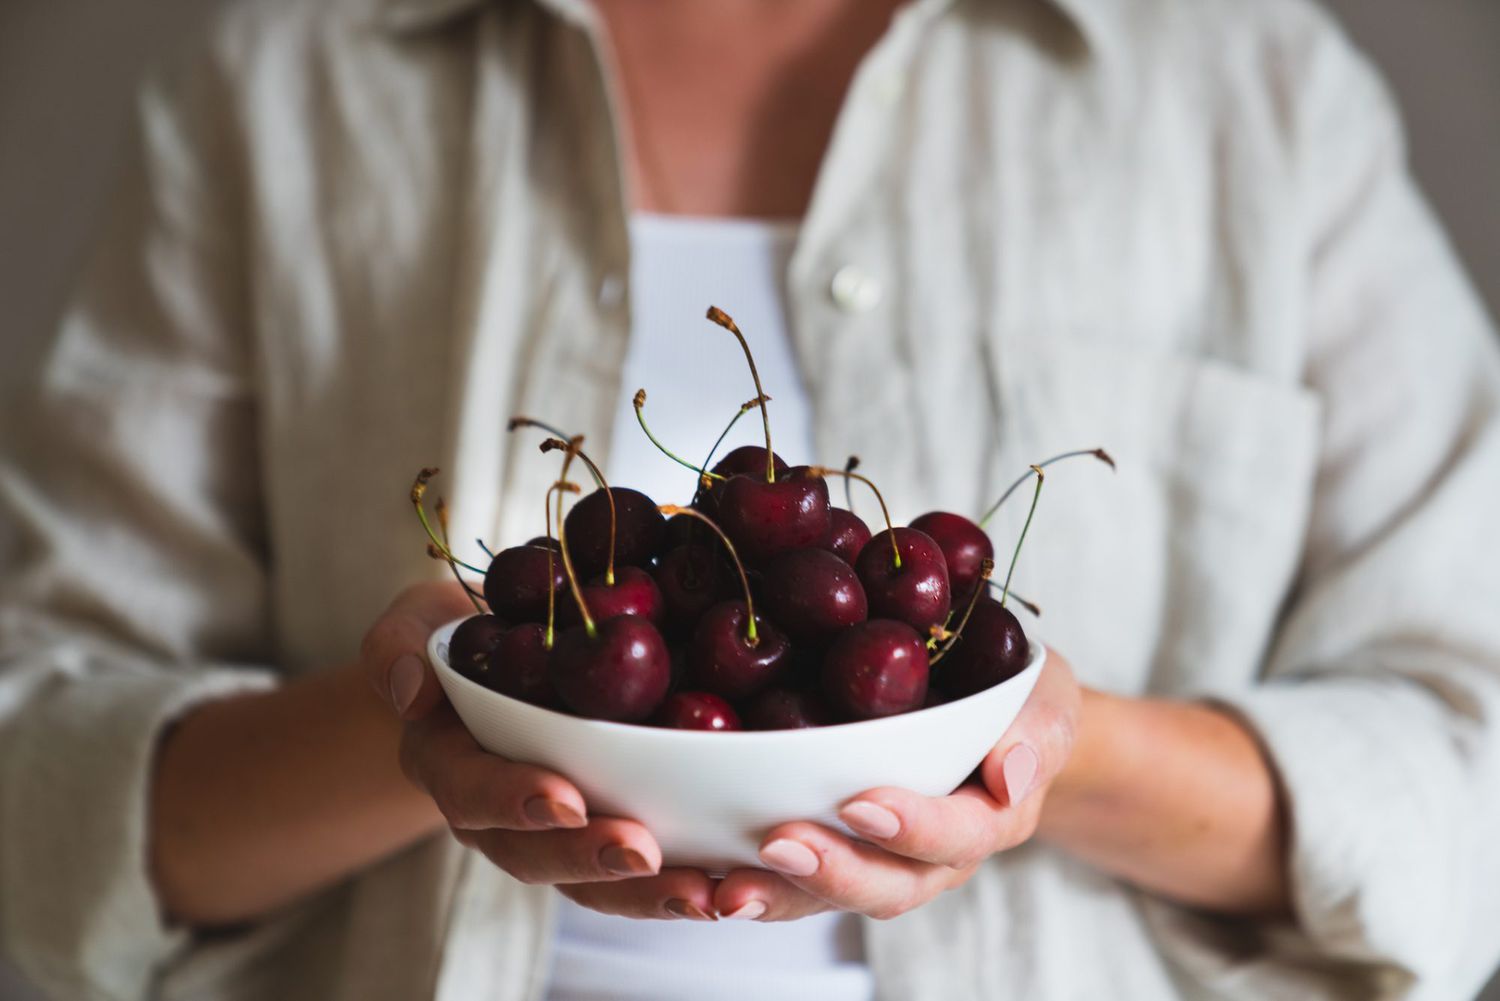 What Health Benefits Do Cherries Have